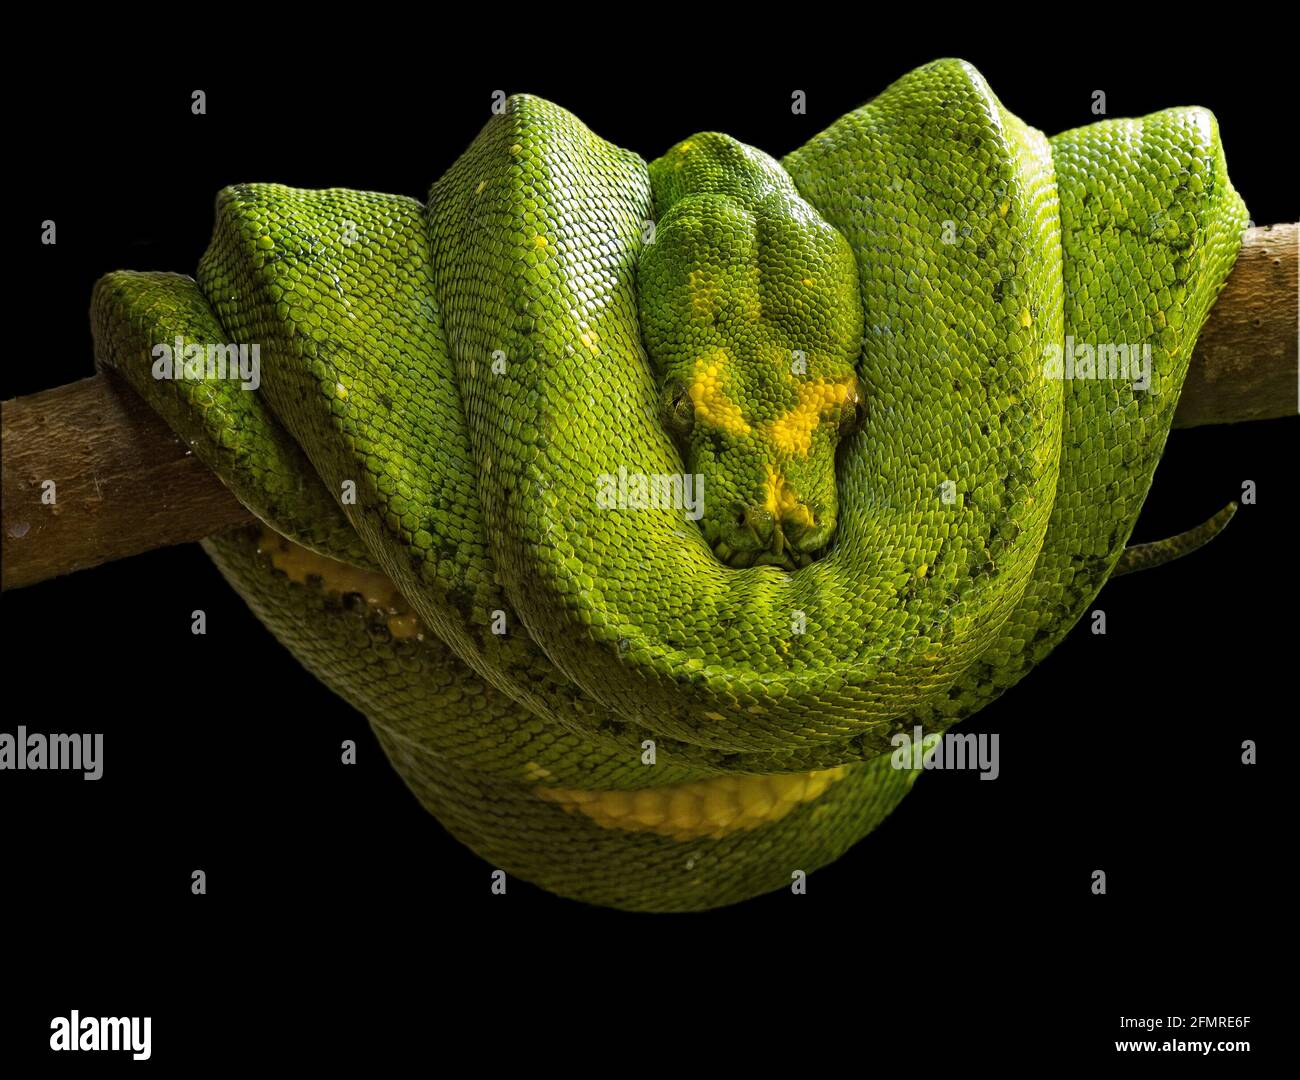 Emerald boa (Corallus caninus) is a non-venomous boa species that inhabits the tropical rainforests of South America. There is no currently recognized Stock Photo